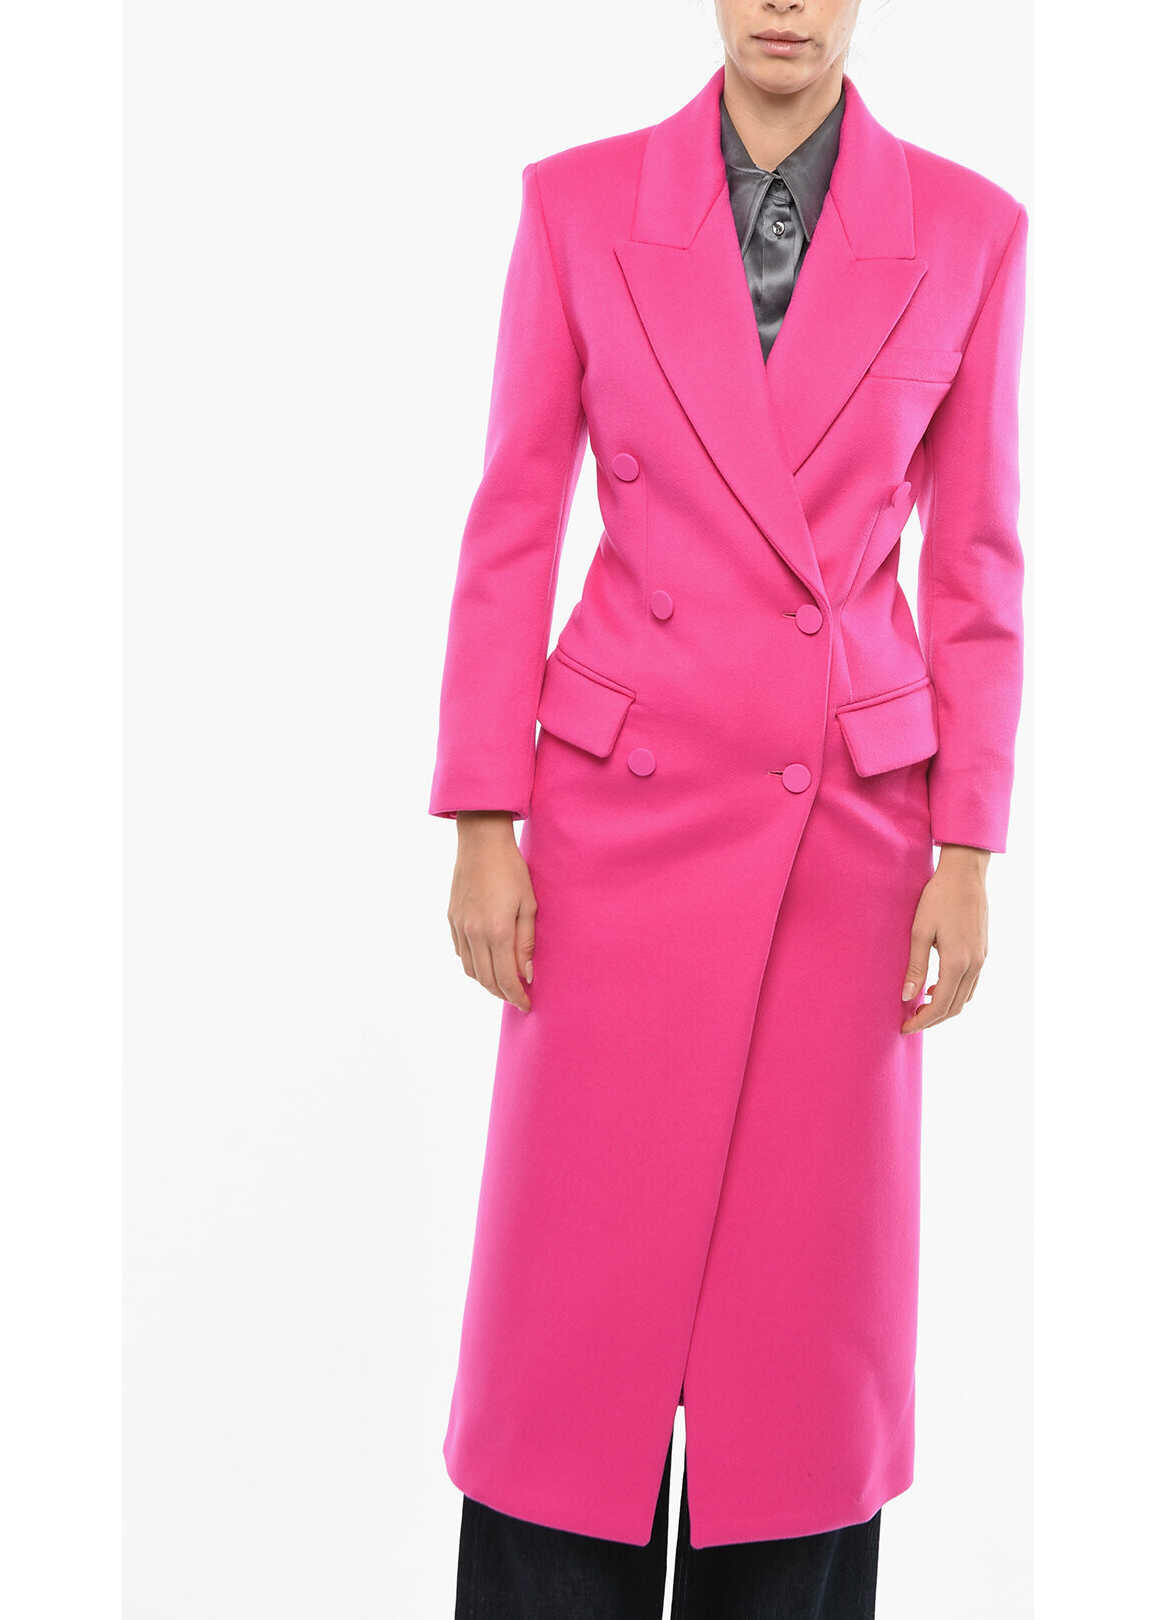 Valentino Garavani Double-Breasted Wool Blend Coat With Covered Buttons Pink